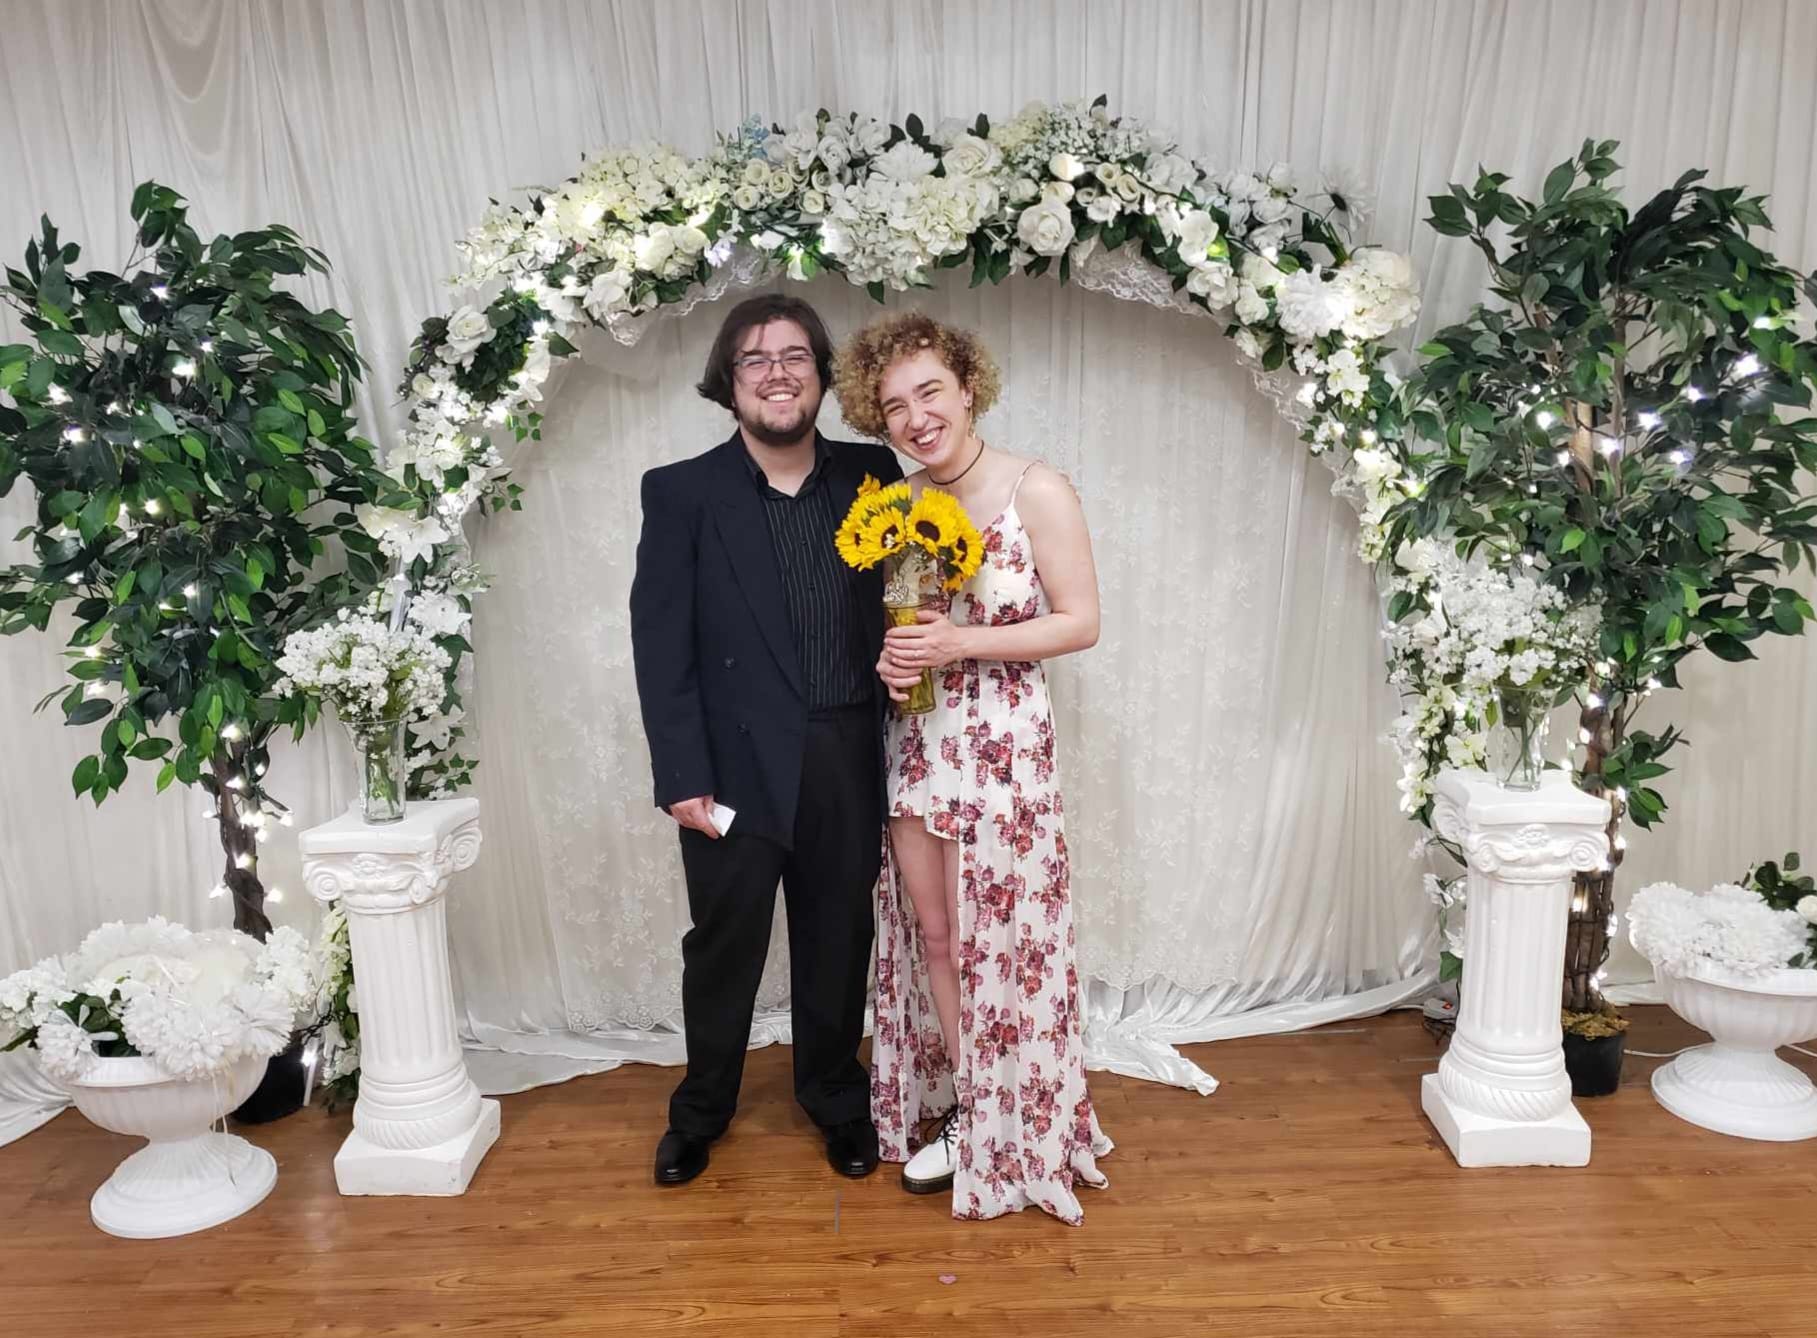 Demitri and I in front of a wedding arch. I am holding a bouquet of sunflowers